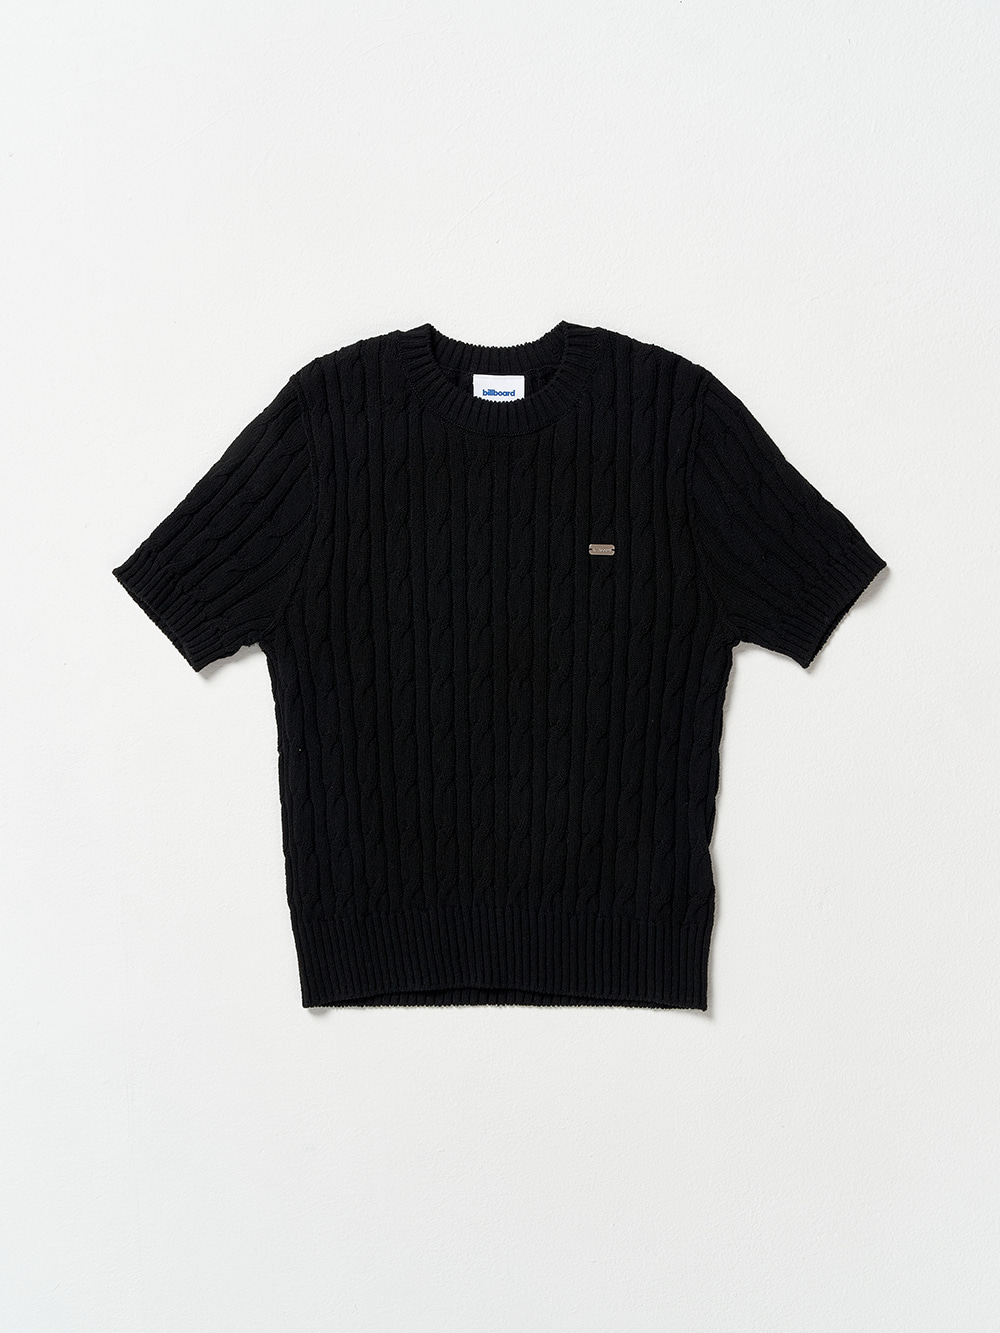 Half Sleeve Cable Knit_Black